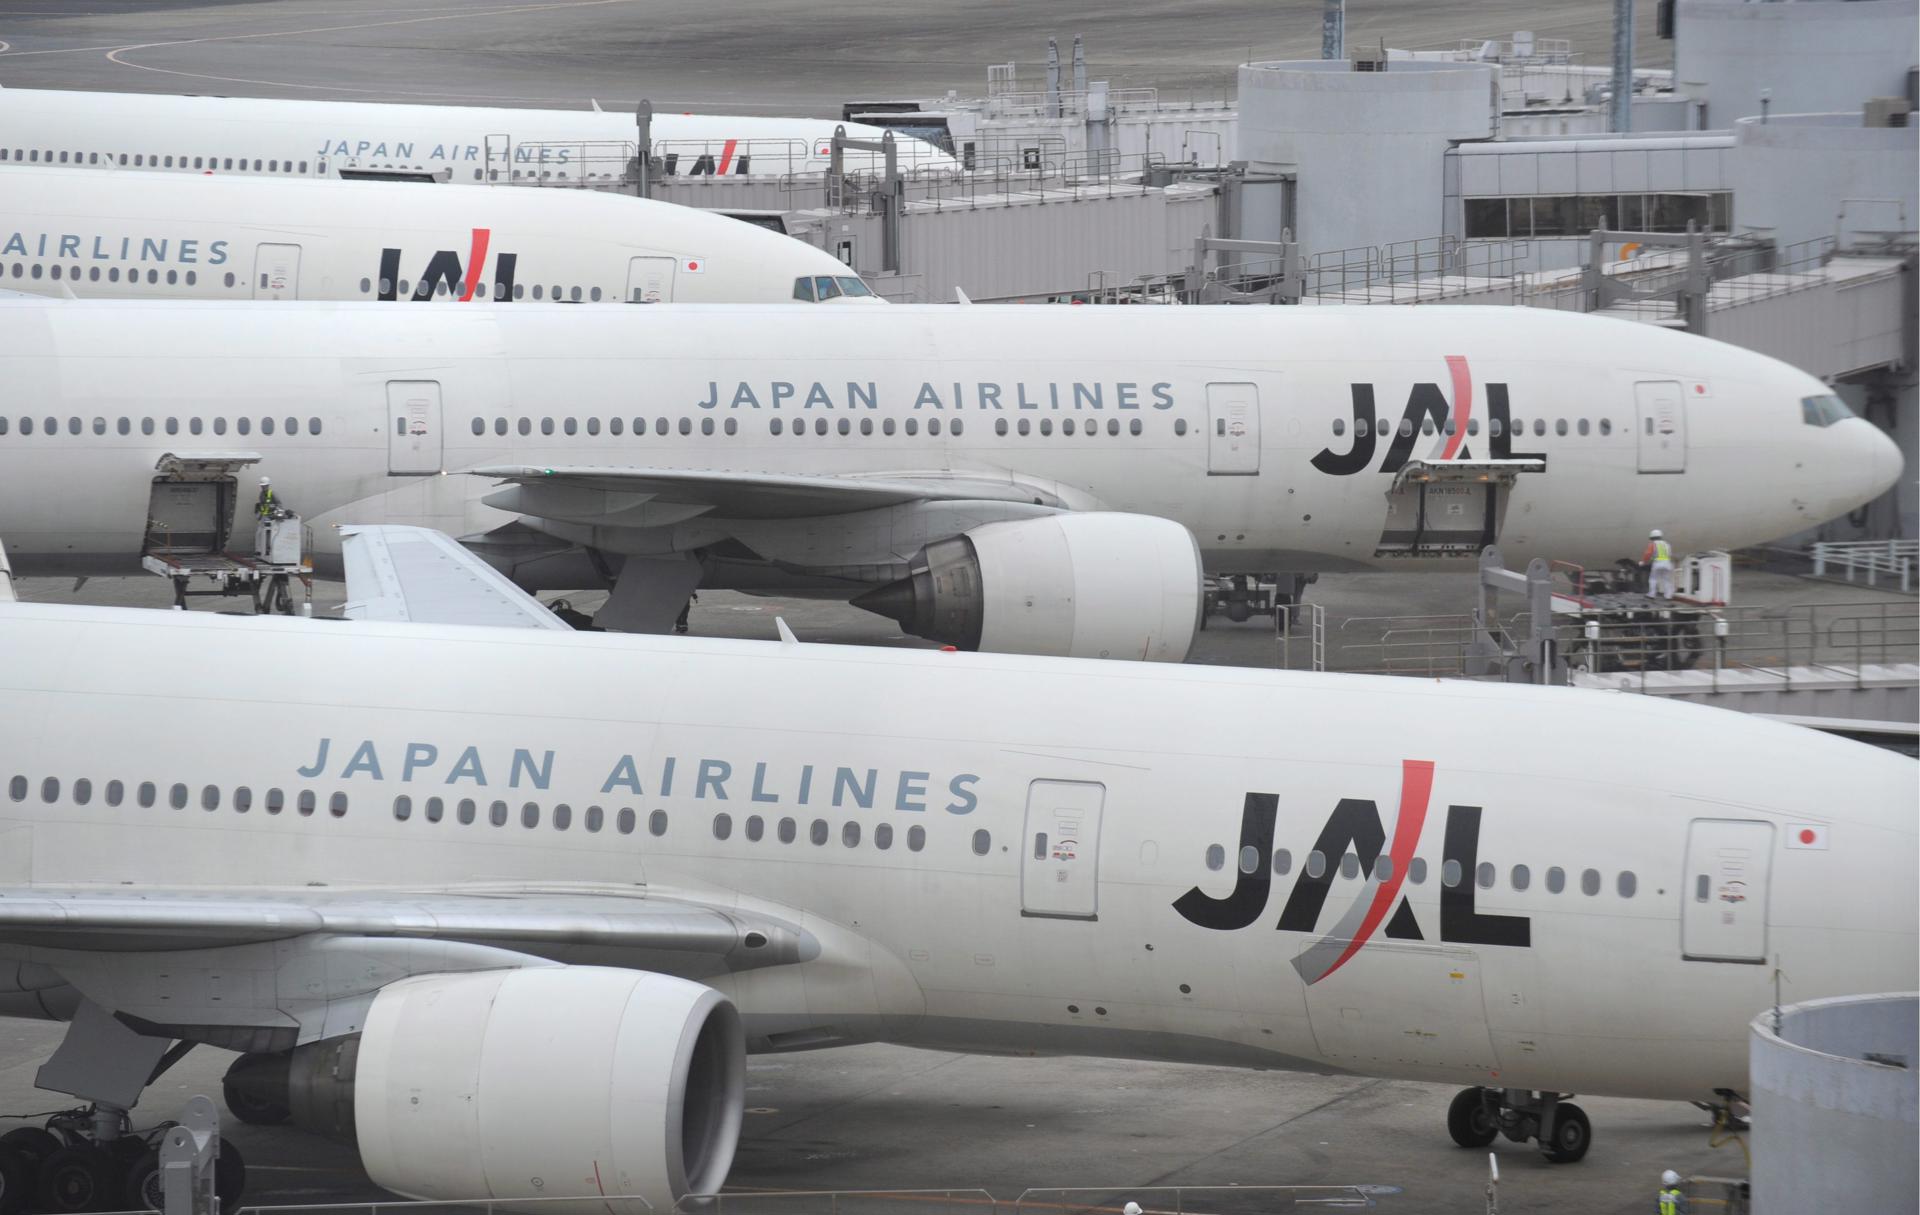 Japan Airlines airplanes on the tarmac at Tokyo International Airport in Tokyo, Japan, 26 February 2010. EPA-EFE FILE/EVERETT KENNEDY BROWN
